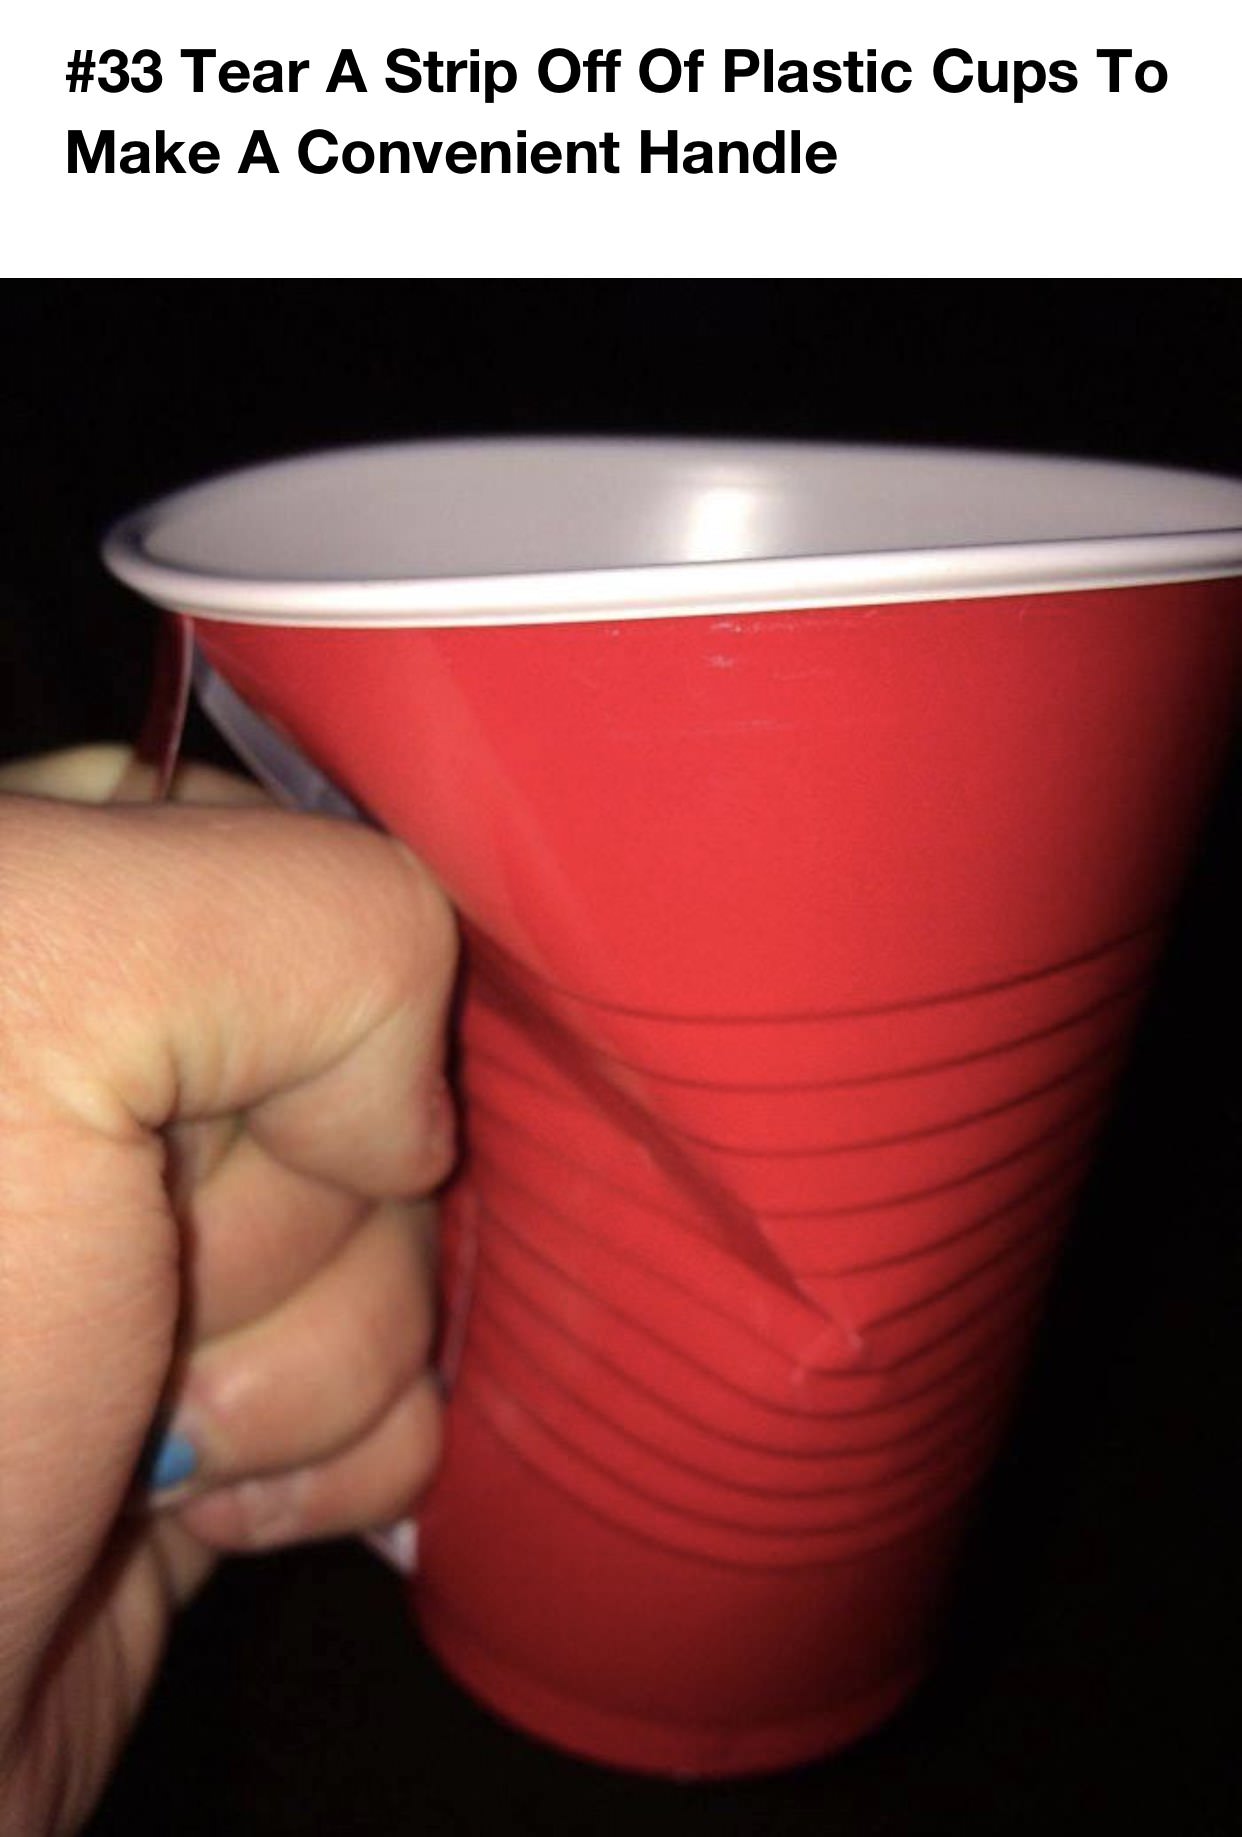 cup - Tear A Strip Off Of Plastic Cups To Make A Convenient Handle